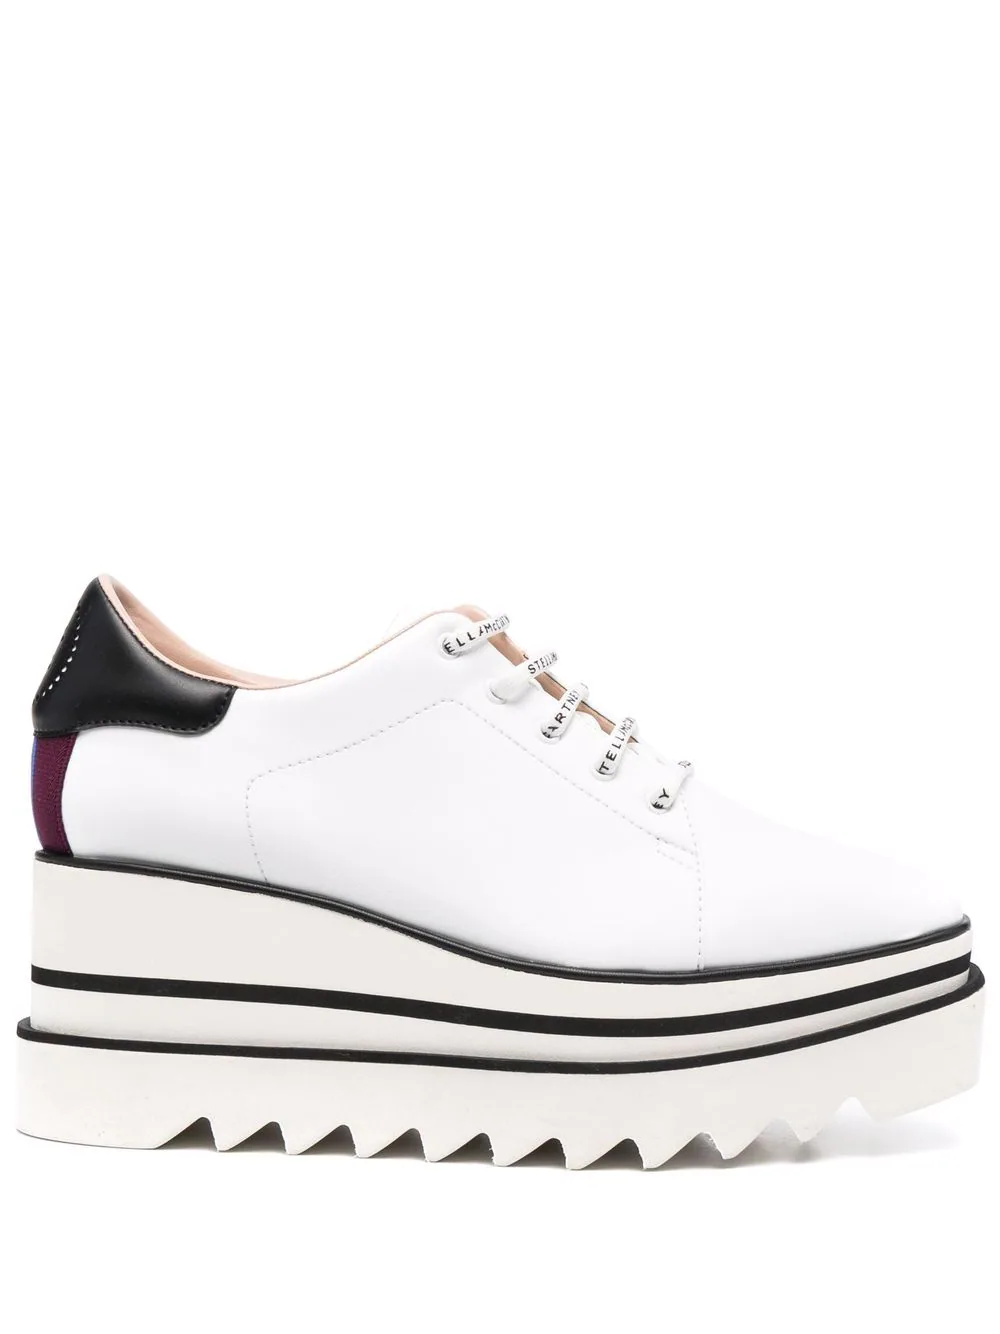 Stella Mccartney Elyse 80mm Sneakers With Non-slip Sole In White